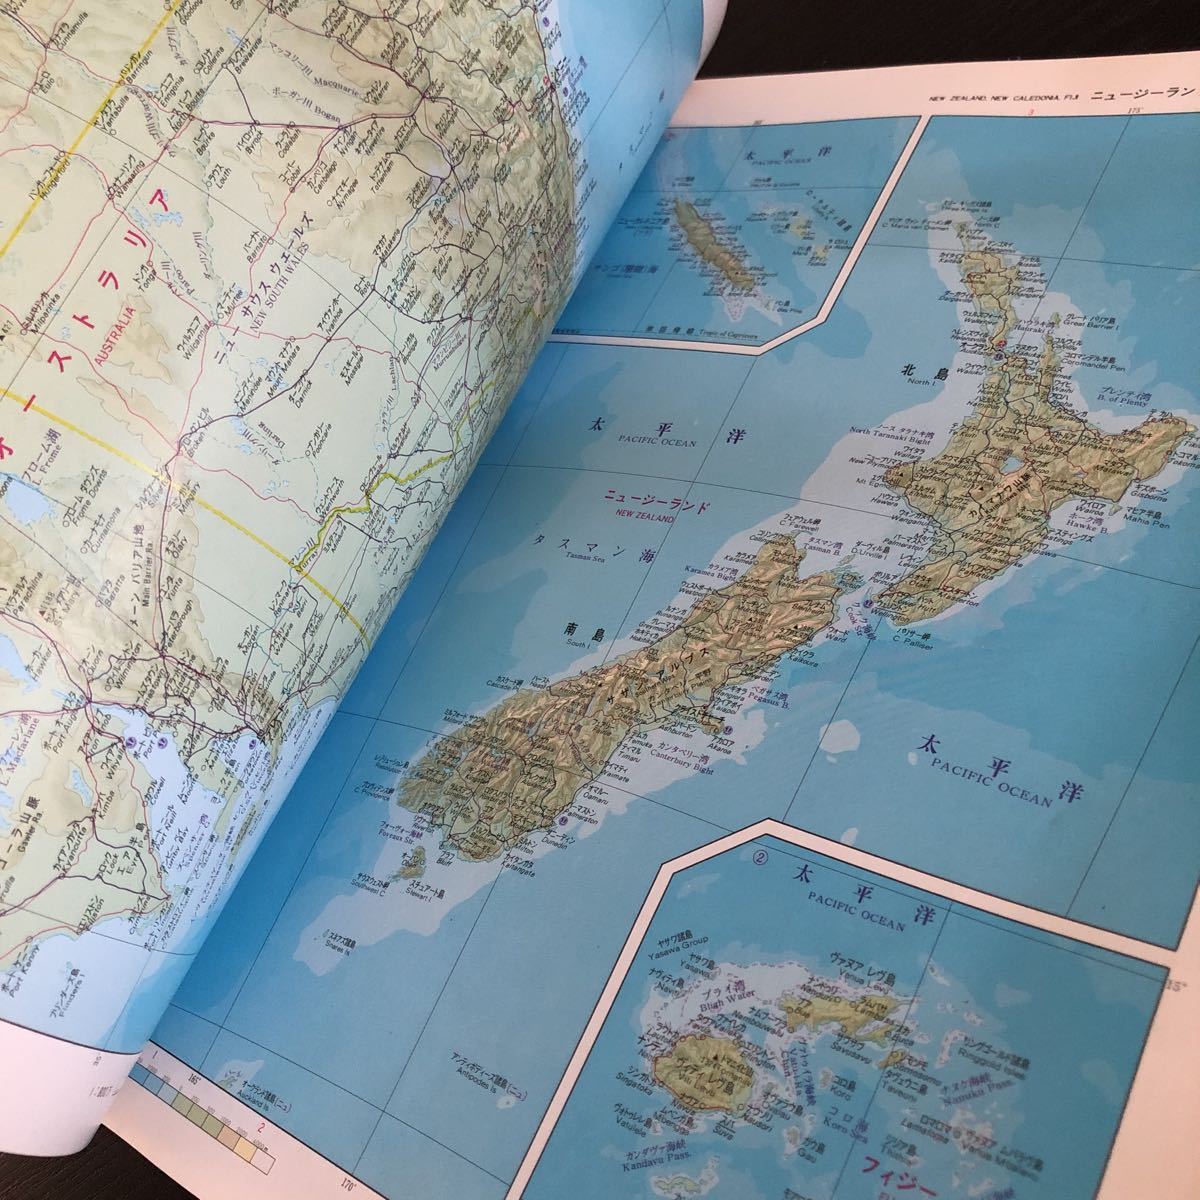 li2 world map 2000 year 7 month issue international geography association tourist attraction detail plan travel map Japan place name retro old Showa era valuable road map foreign traveling abroad traffic 